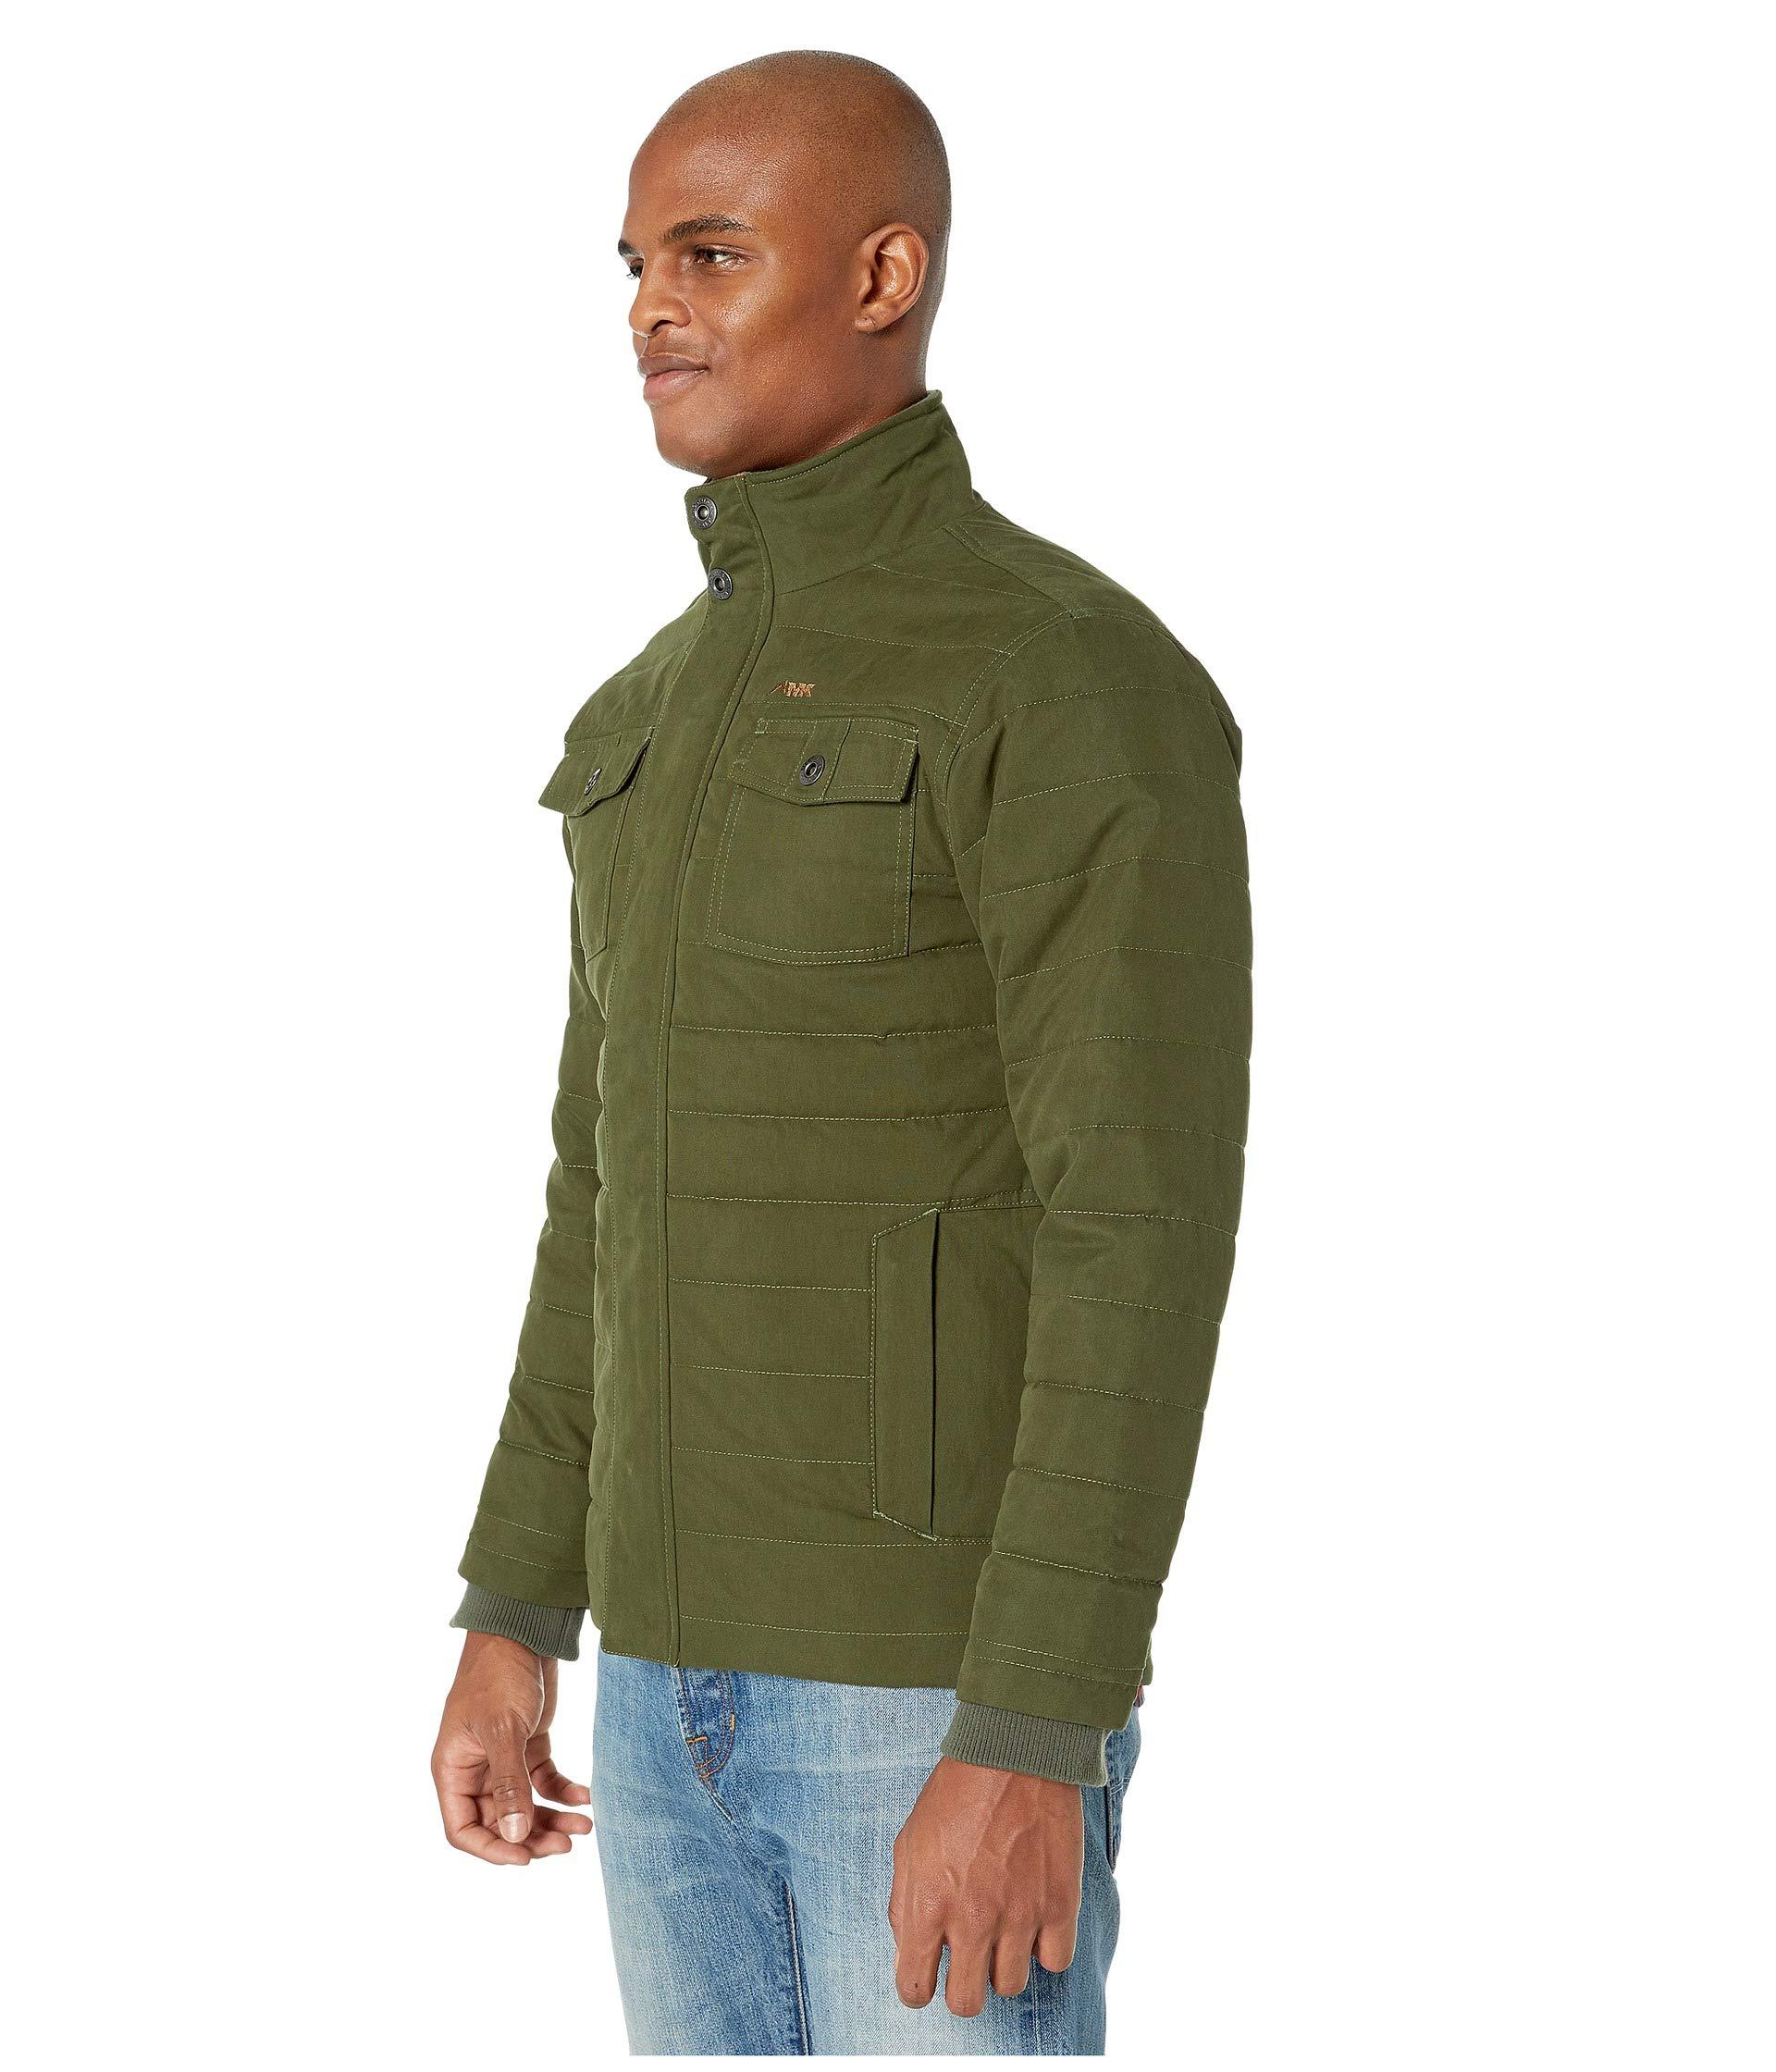 Mountain Khakis Cotton Swagger Jacket in Green for Men - Lyst